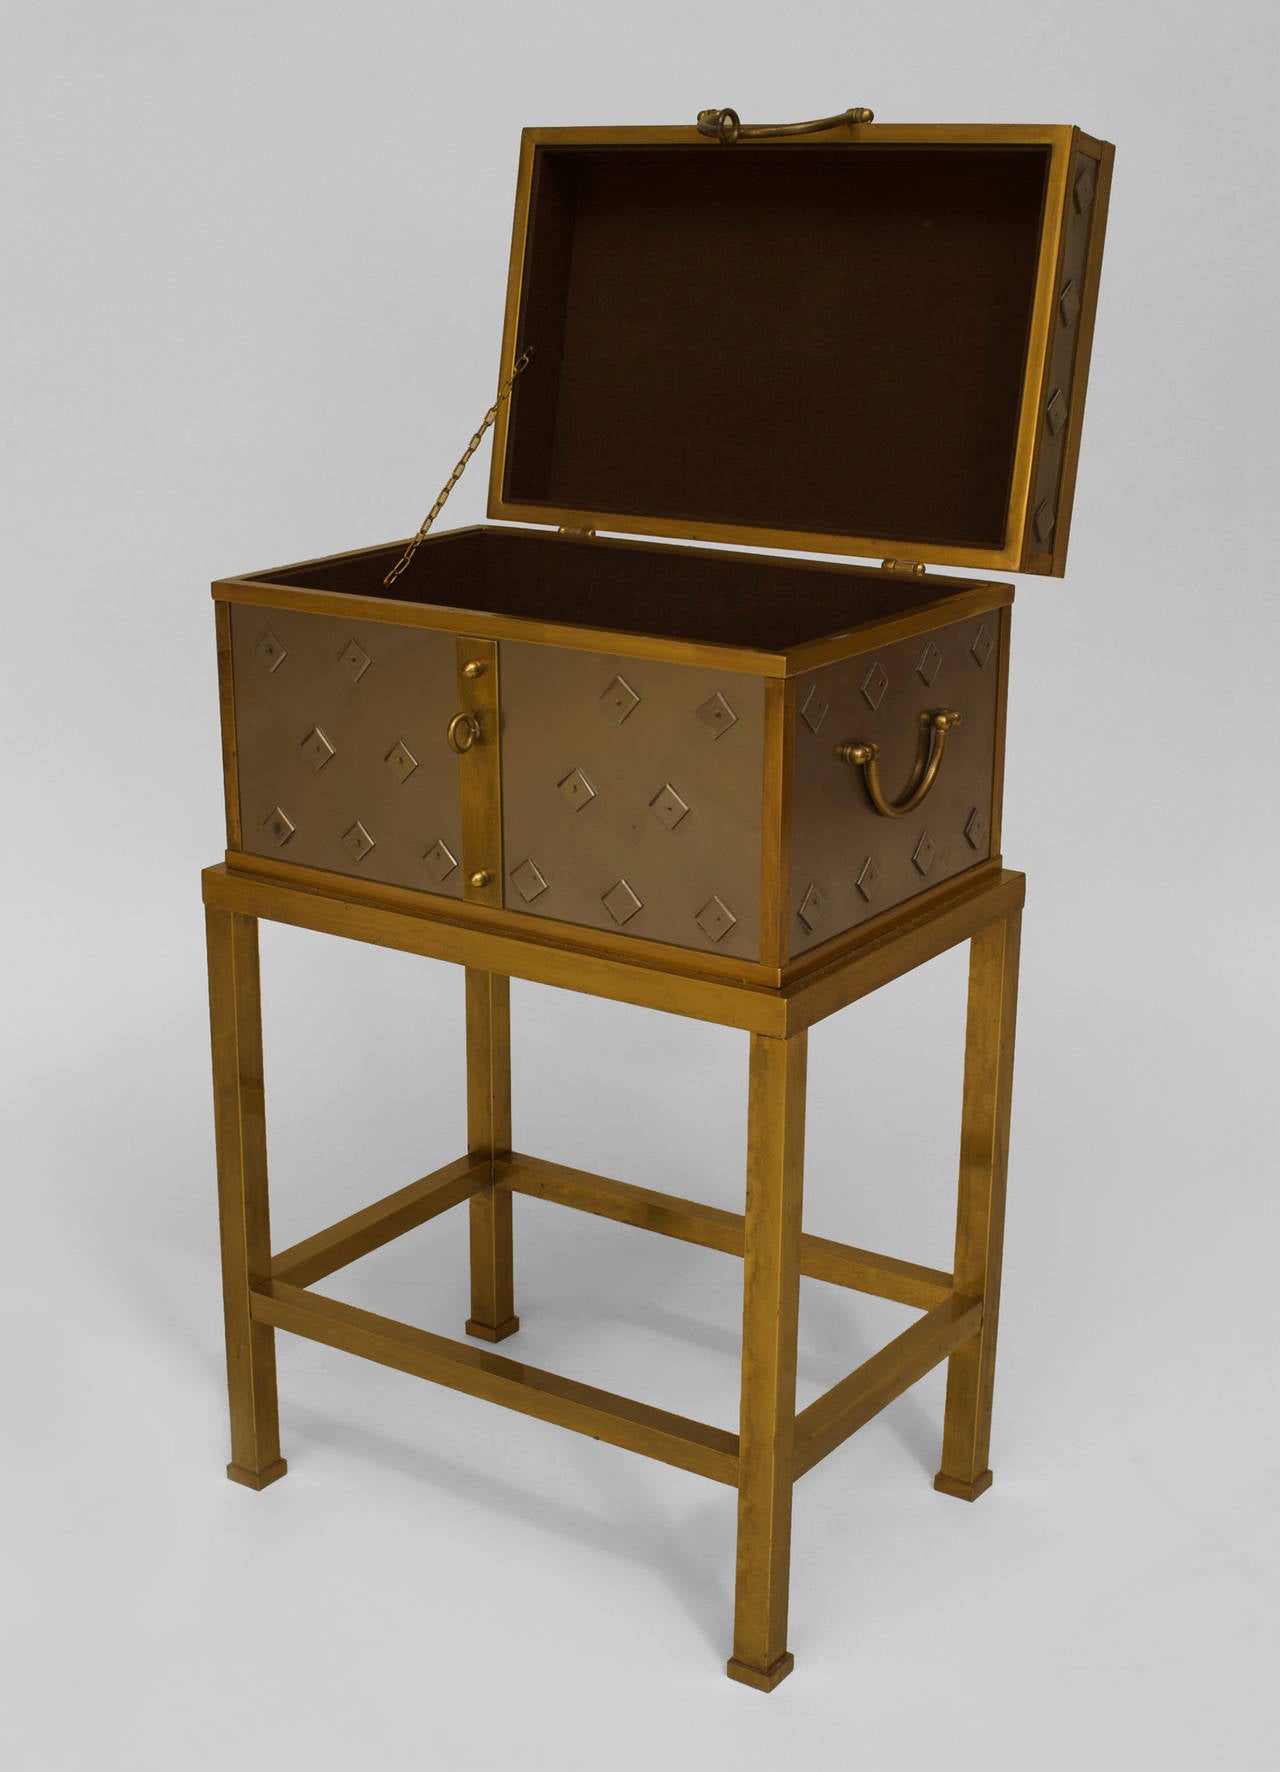 Italian silvered and brass trimmed box or chest with side handles and an applied diamond design resting on a brass base.